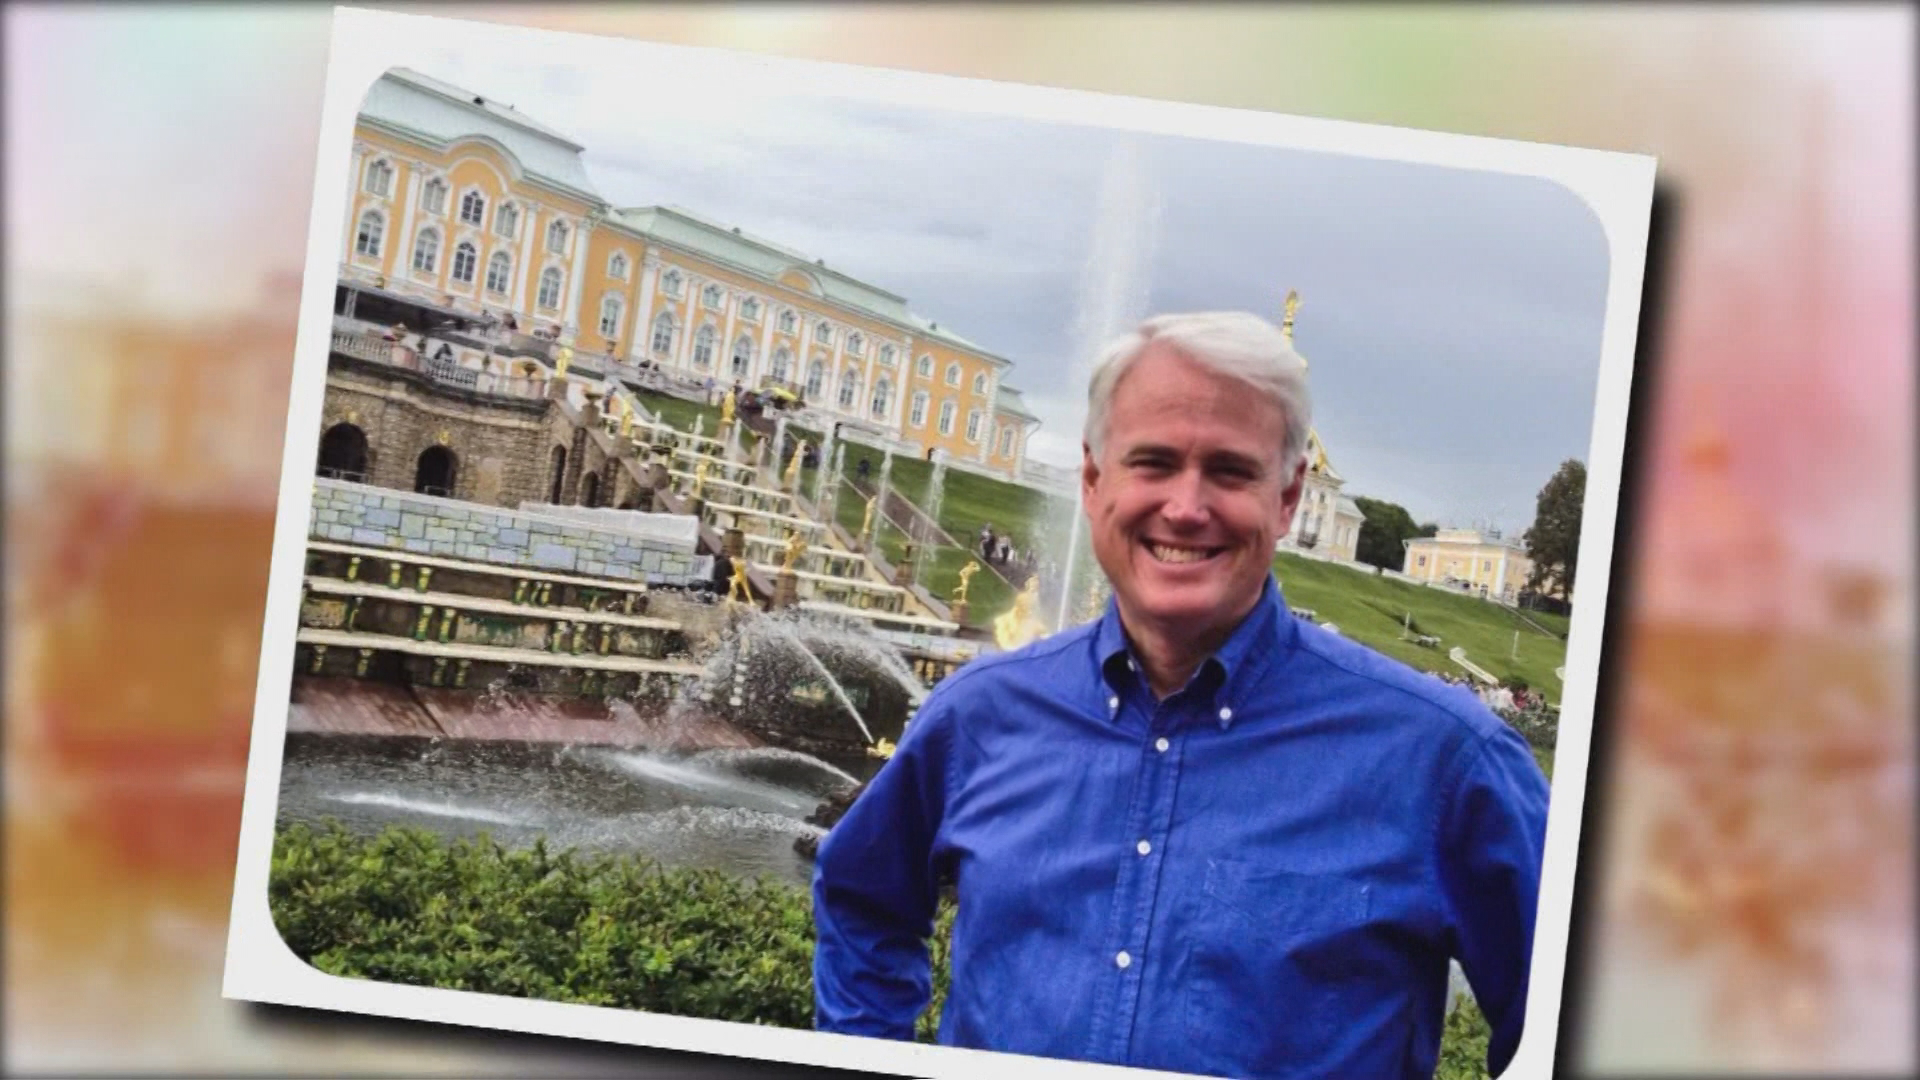 Scott Swan takes you to Russia, the host country of the 2014 Winter Olympic Games. Scott takes us on a tour to find compelling stories host nation.